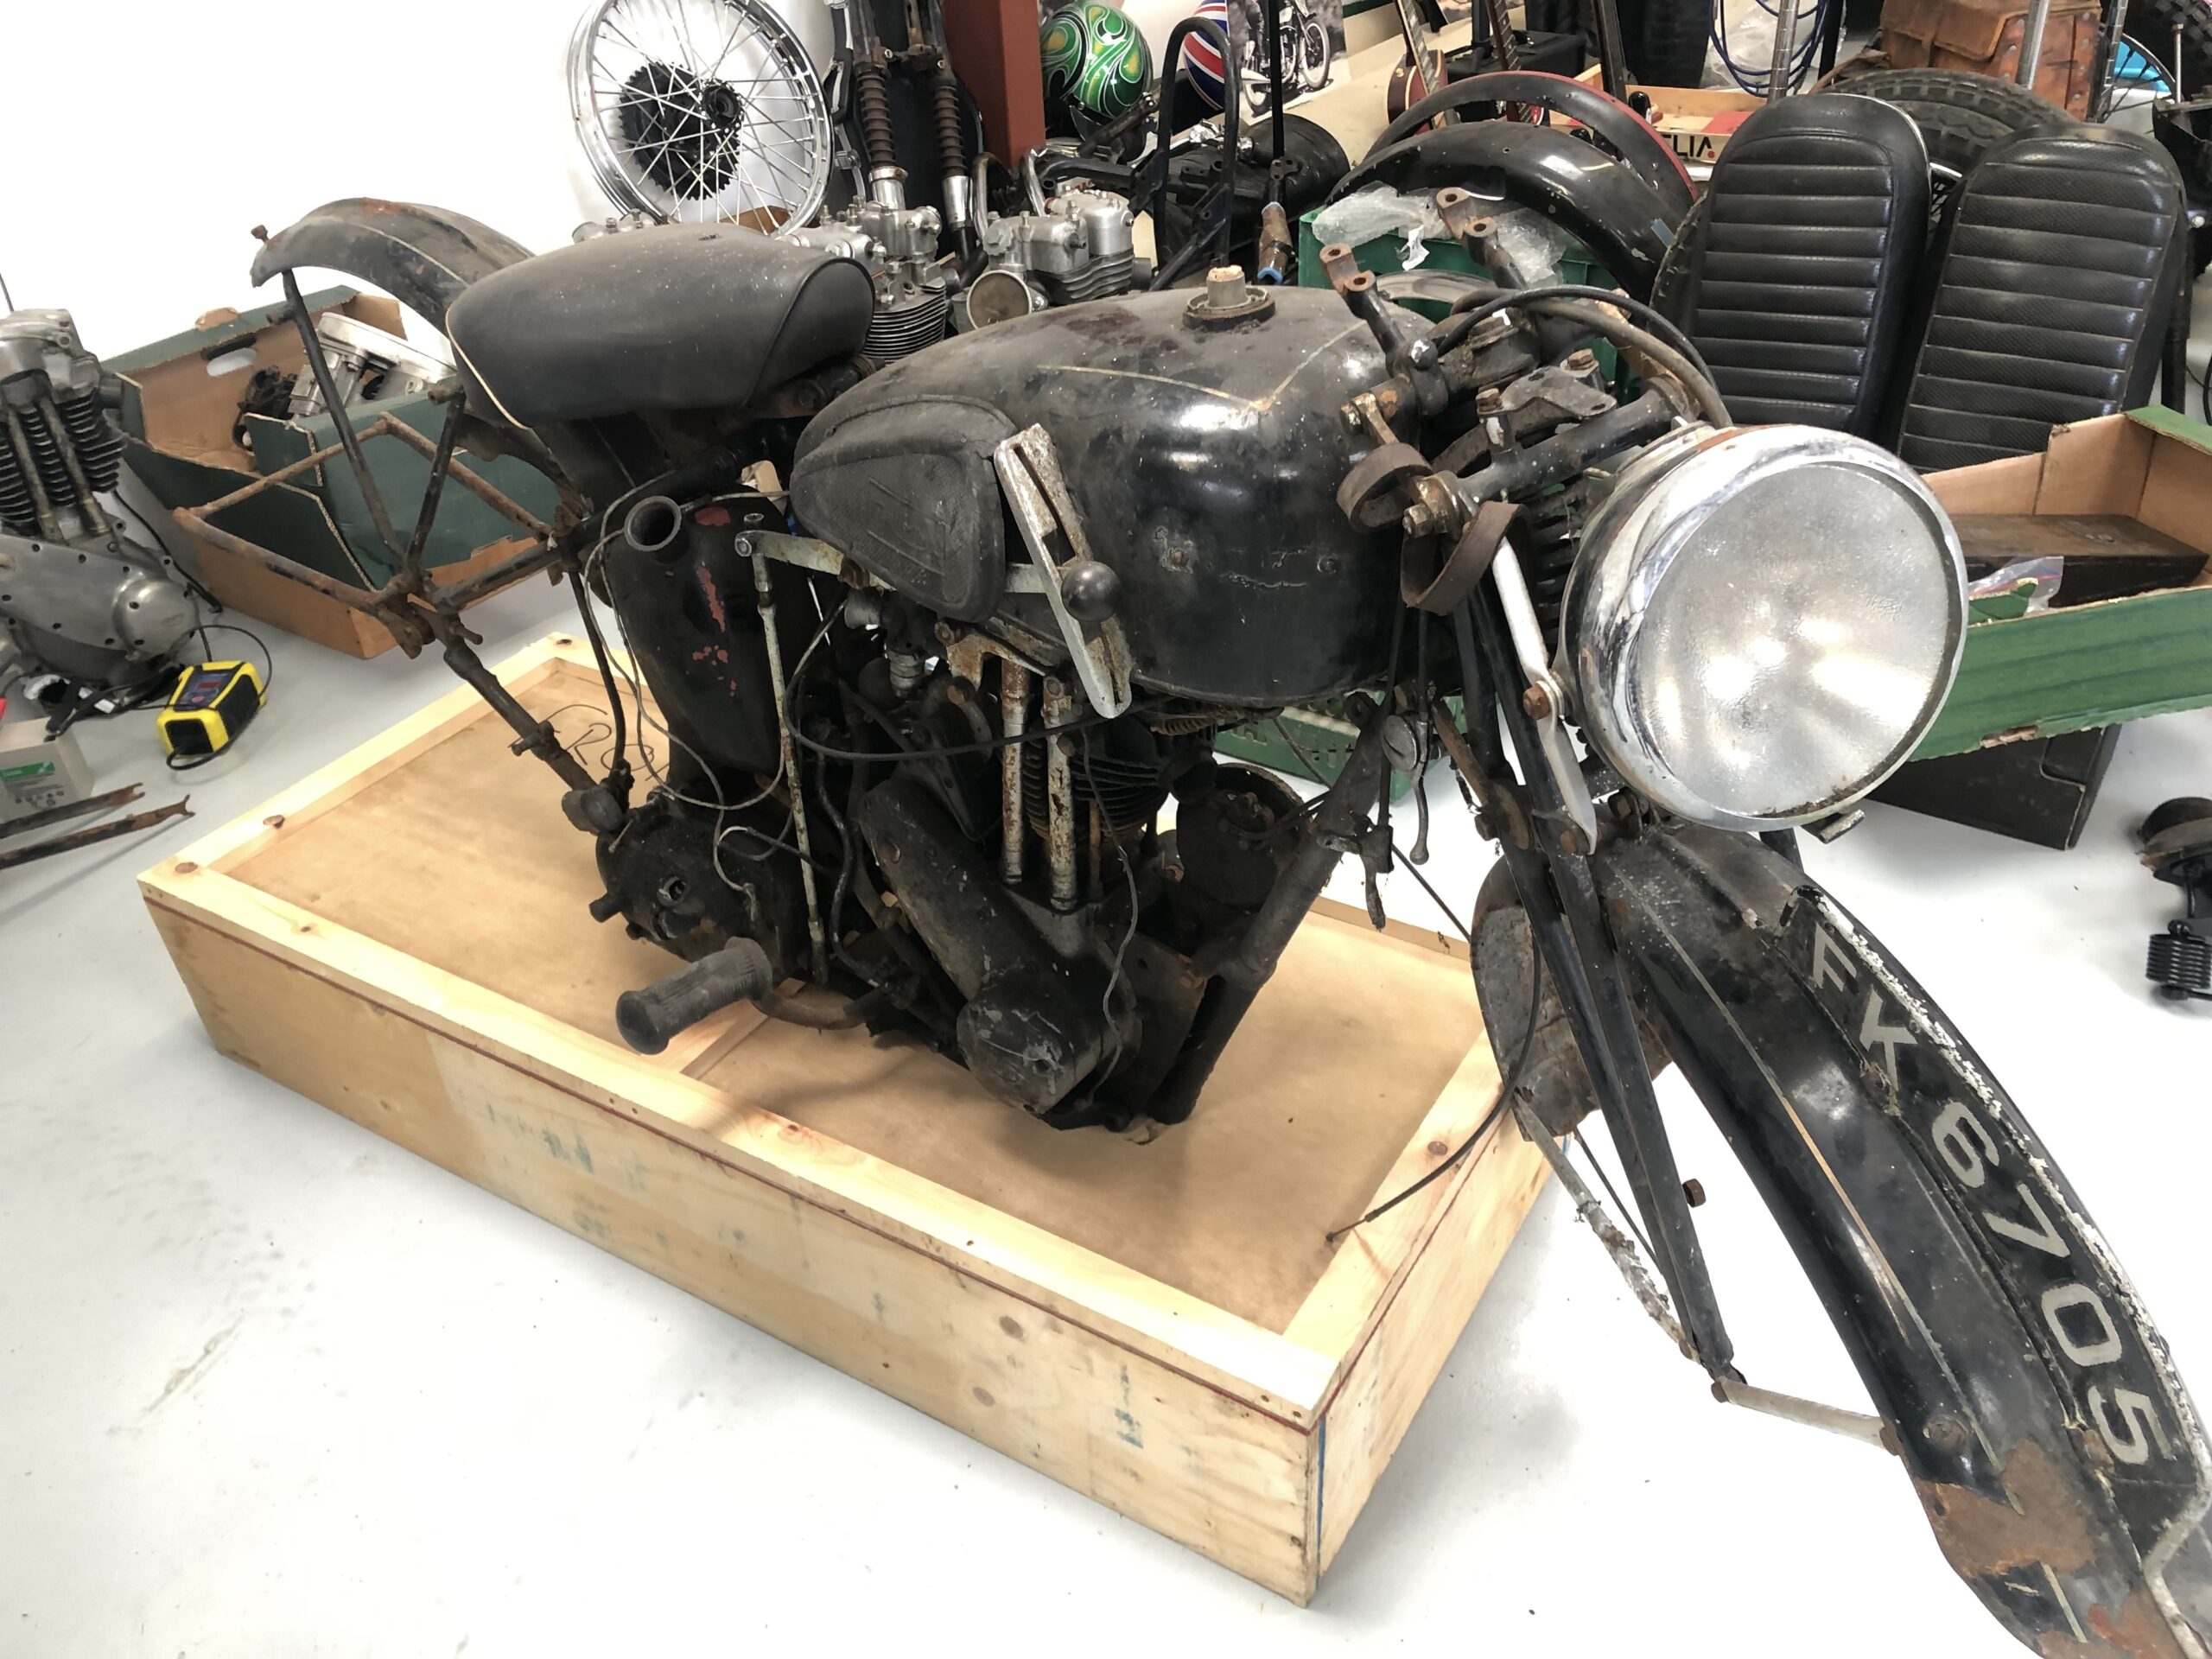 1935 vintage motorcycle Val Page Triumph 250cc 2/1 project with V5. 1930s Rigid frame Triumph for sale with an overhead valve engine. original patina condition